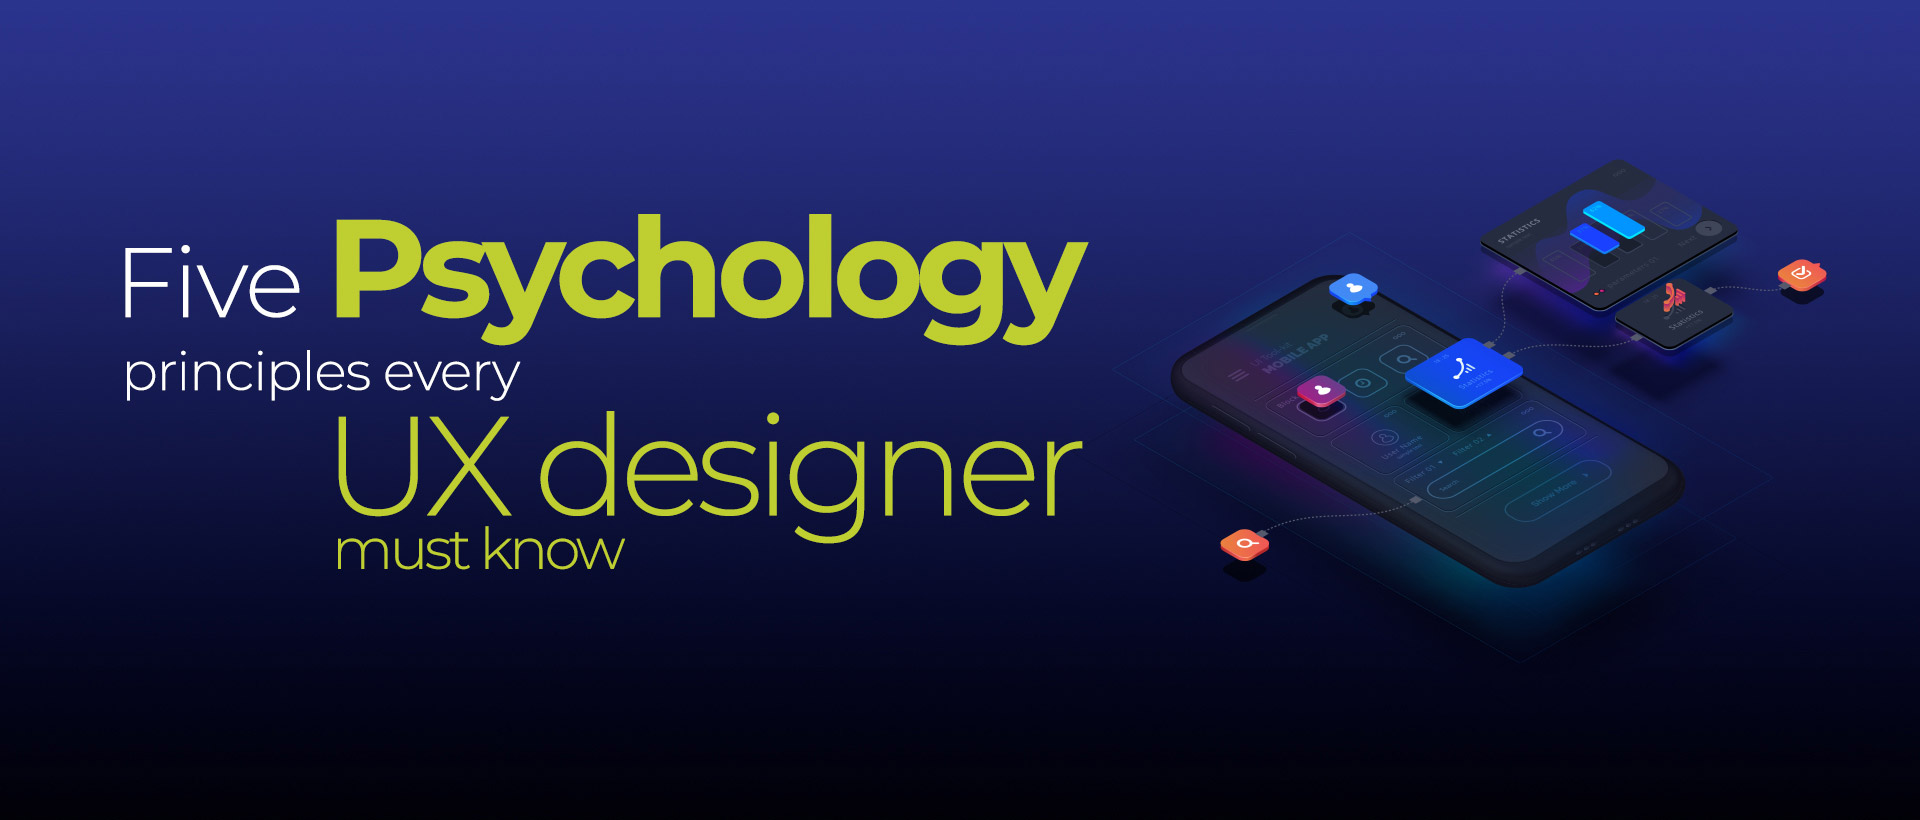 5 Psychology principles every UX designer must know